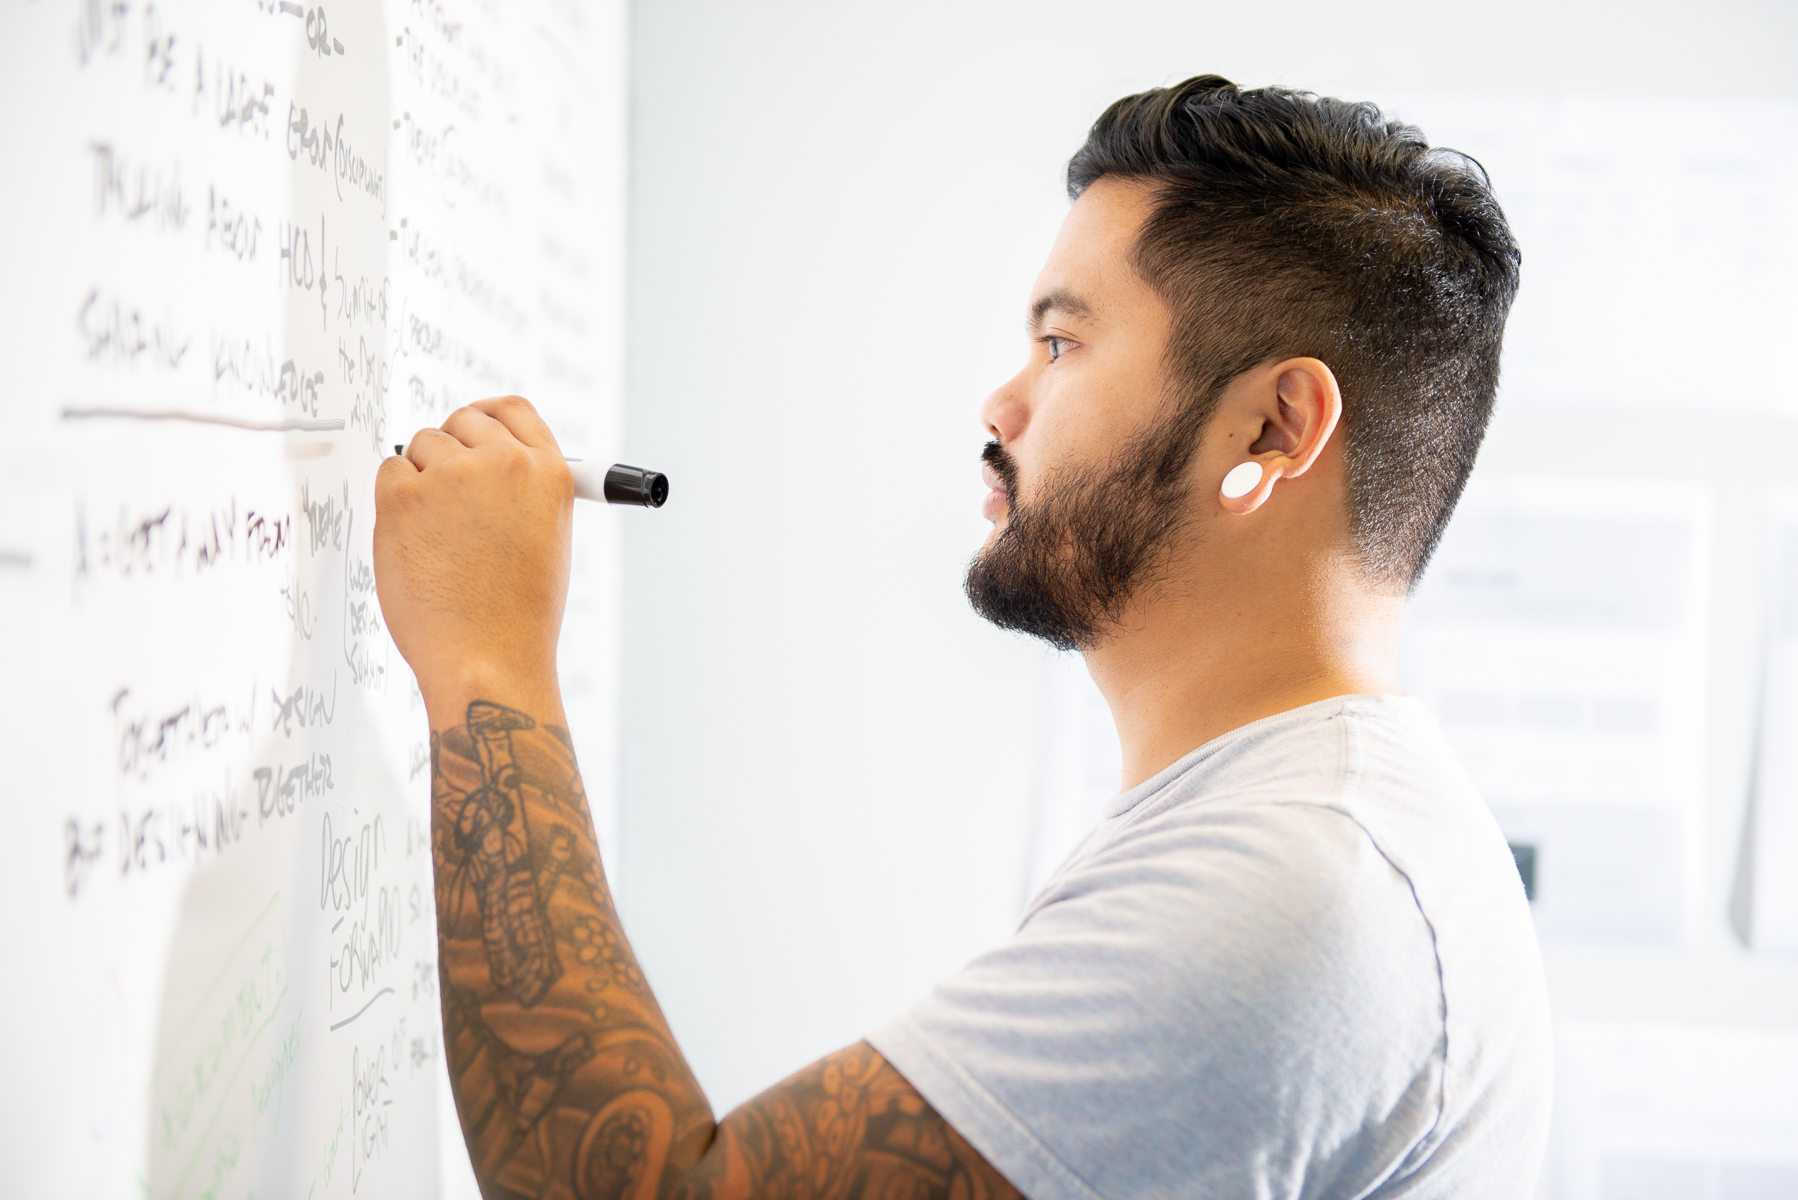 Advertising art director working on white board